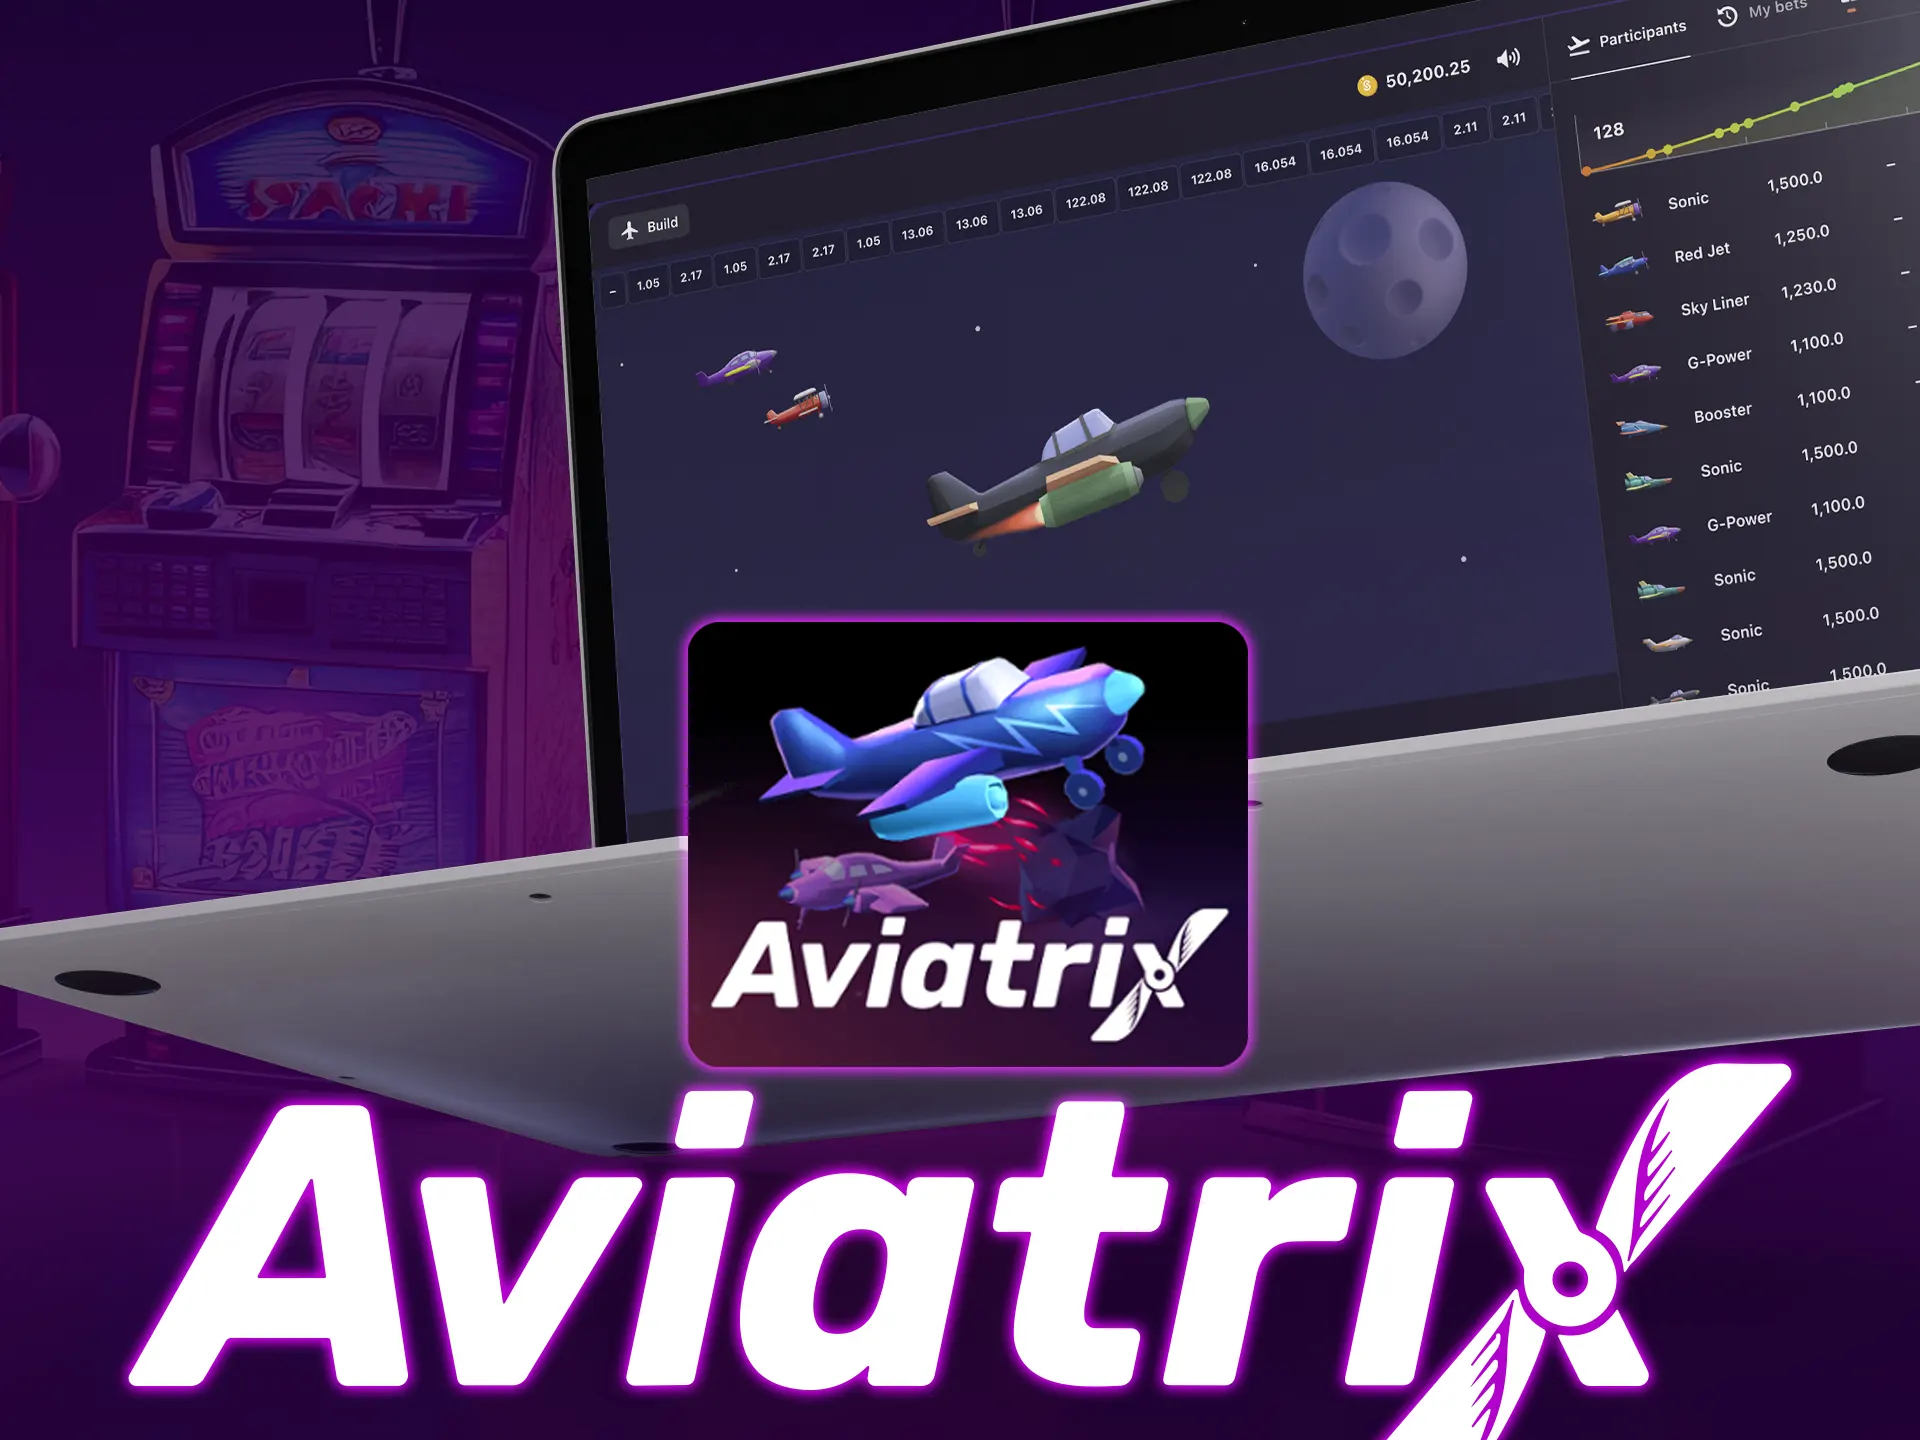 Aviatrix offers NFT-powered gaming with customizable planes.